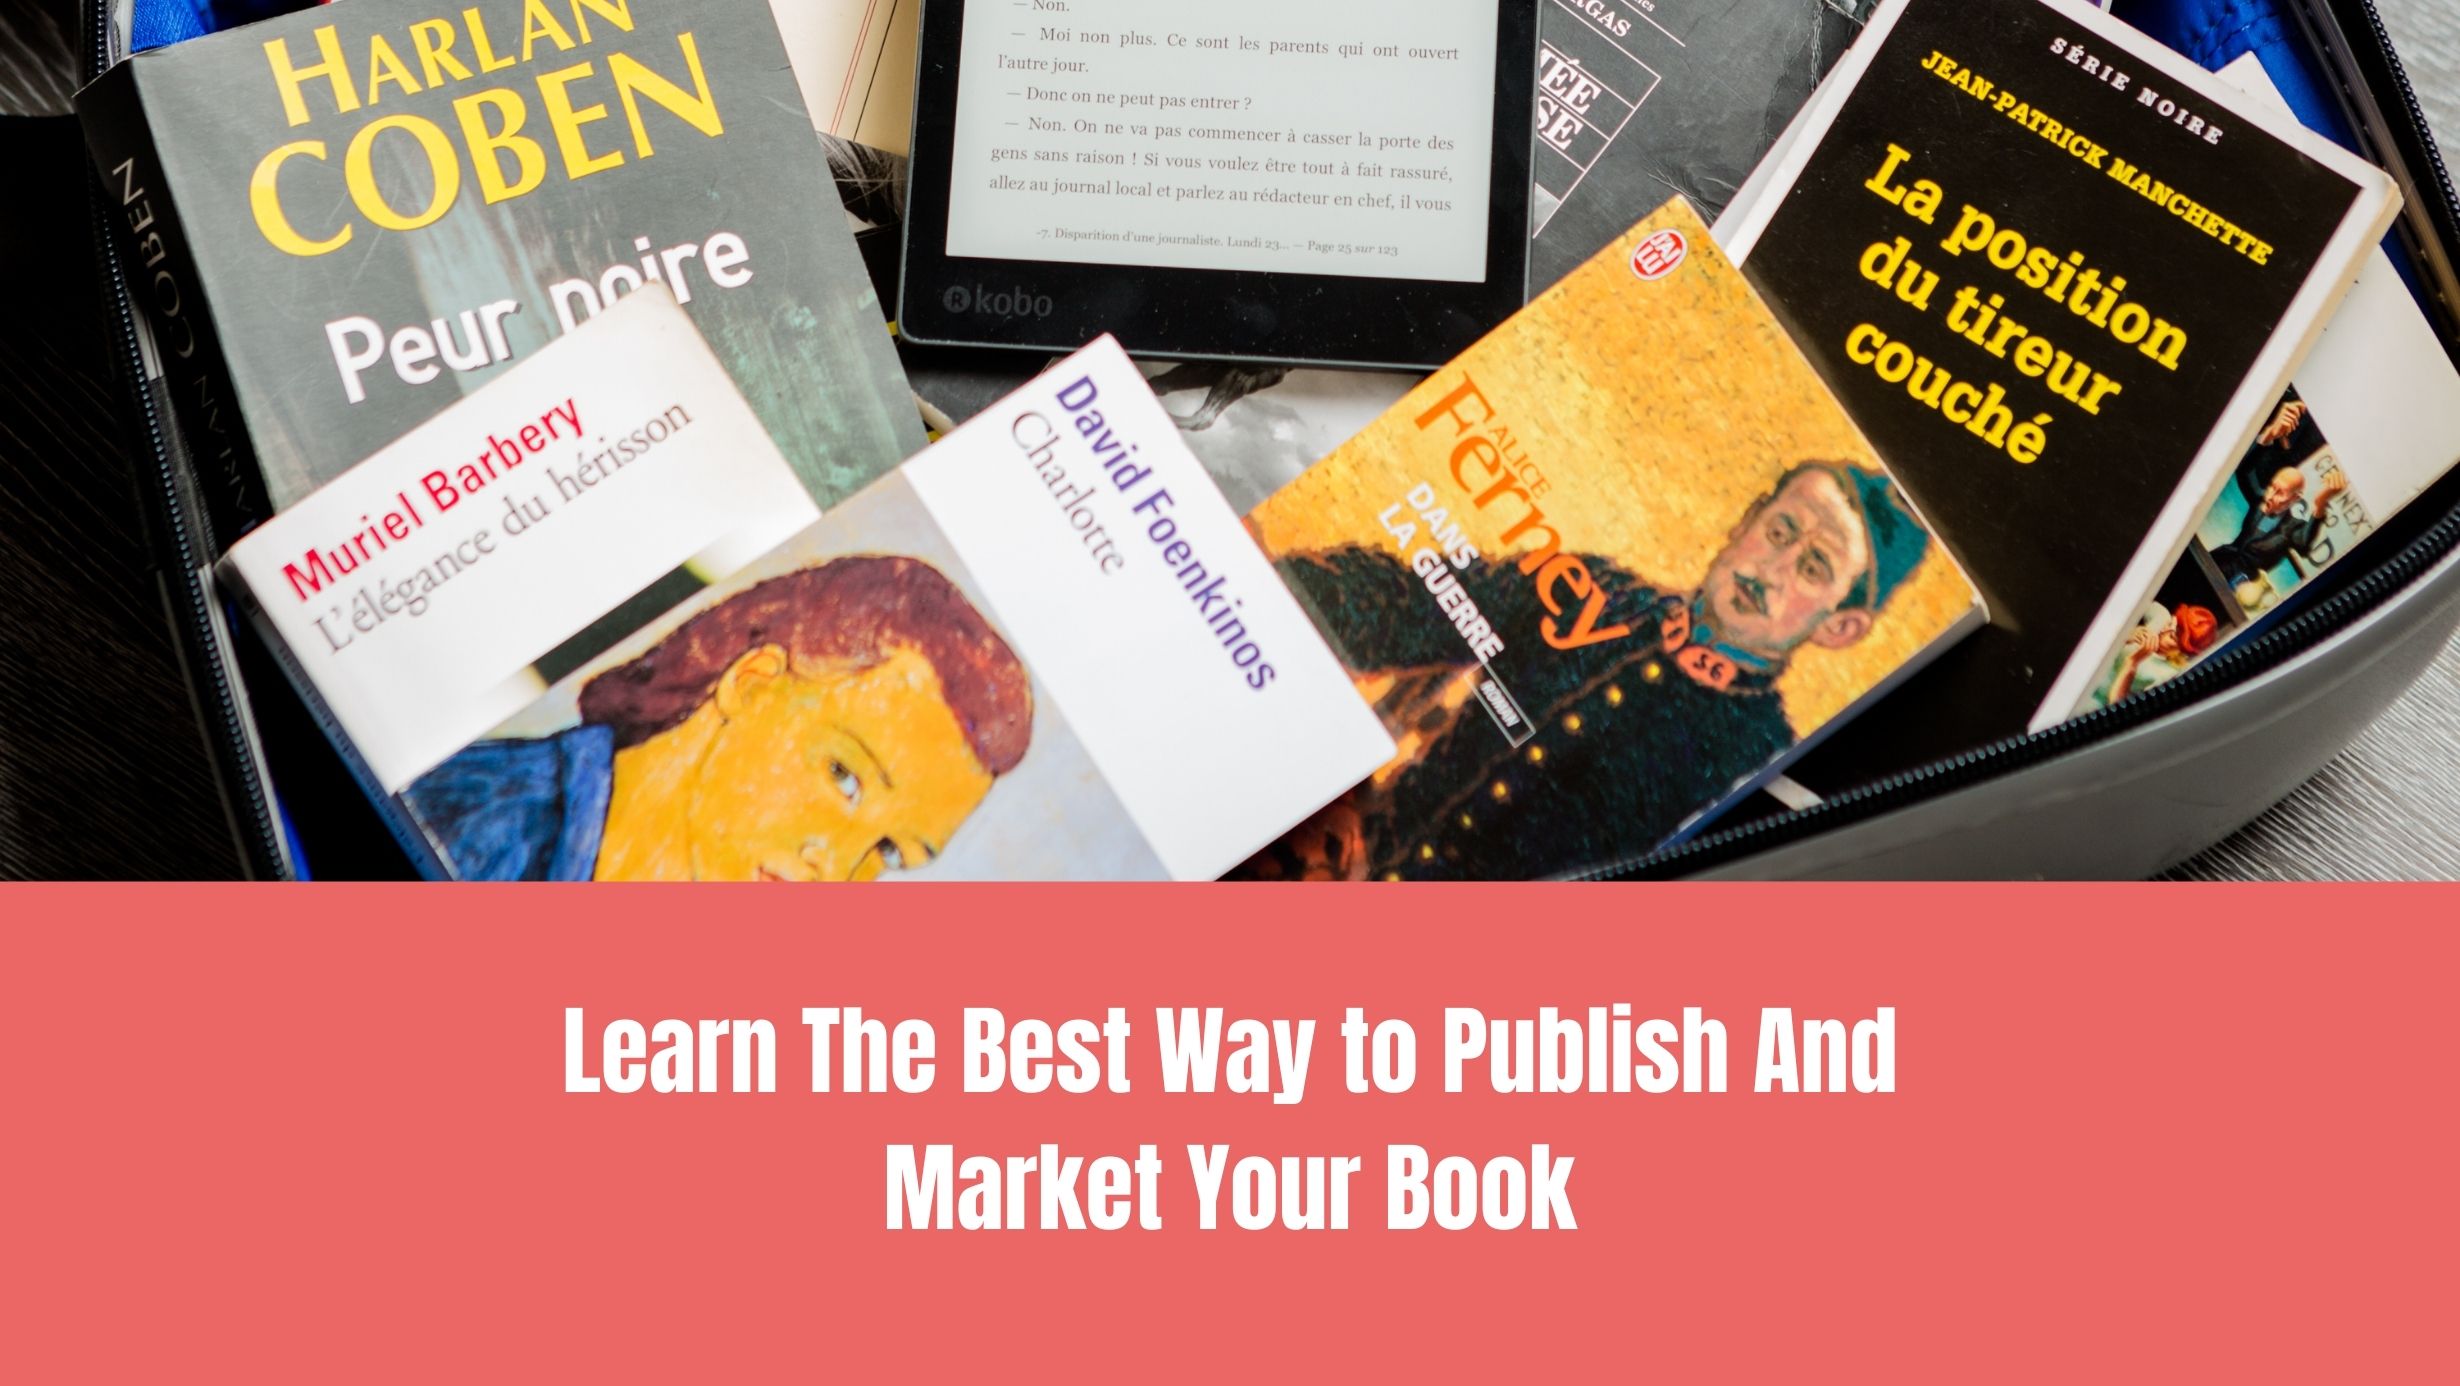 Learn The Best Way to Publish and Market Your Book